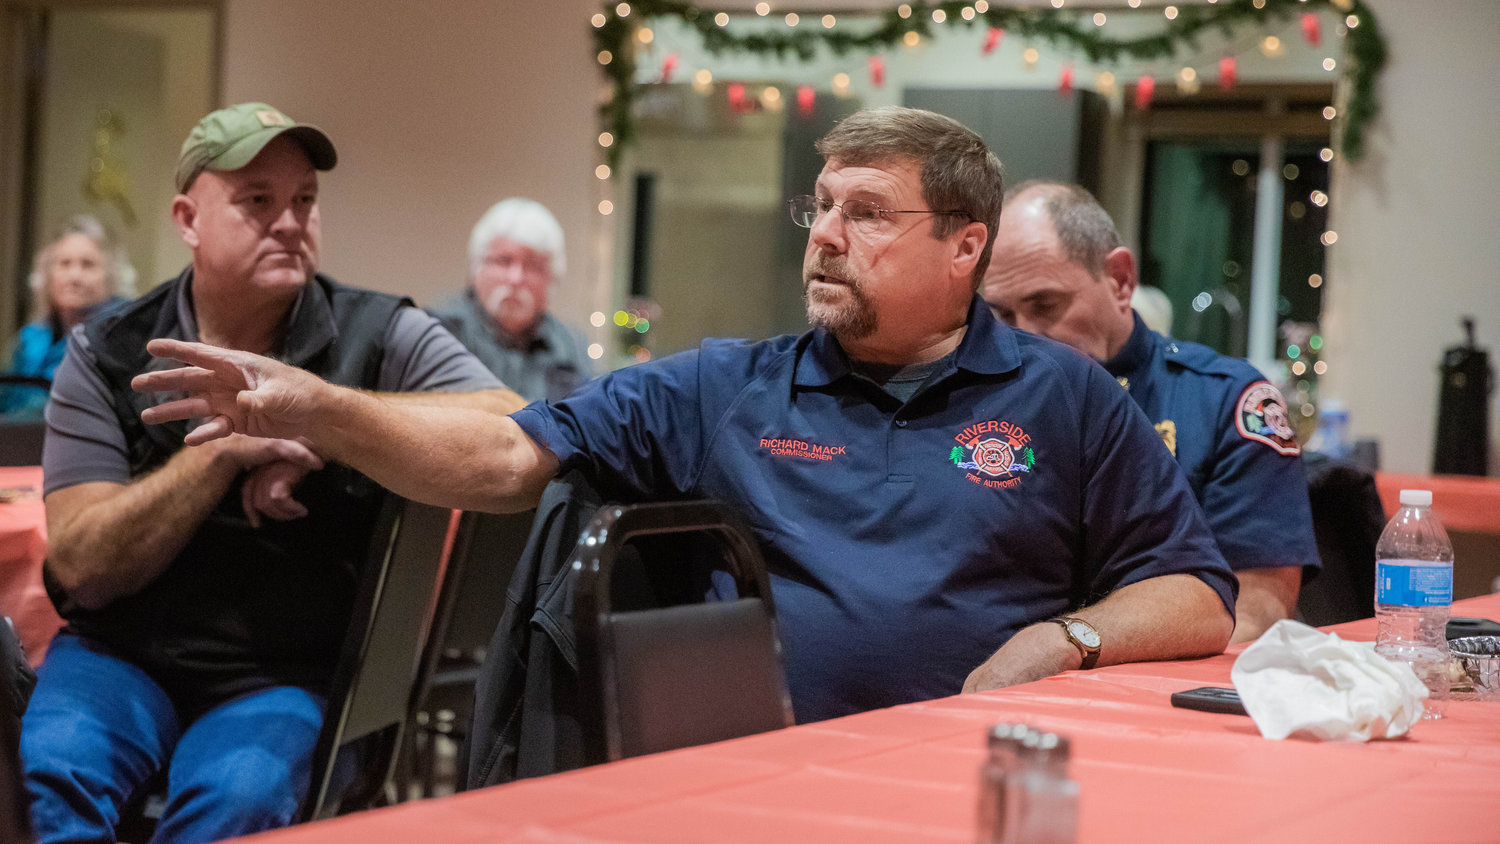 Fire Commissioner Richard Mack, of Riverside Fire Authority, talks about the importance of education around fire alarms Monday night at the Lewis County Fire District 3 building in Mossyrock. Life expectancy of a fire alarm is 10 years.